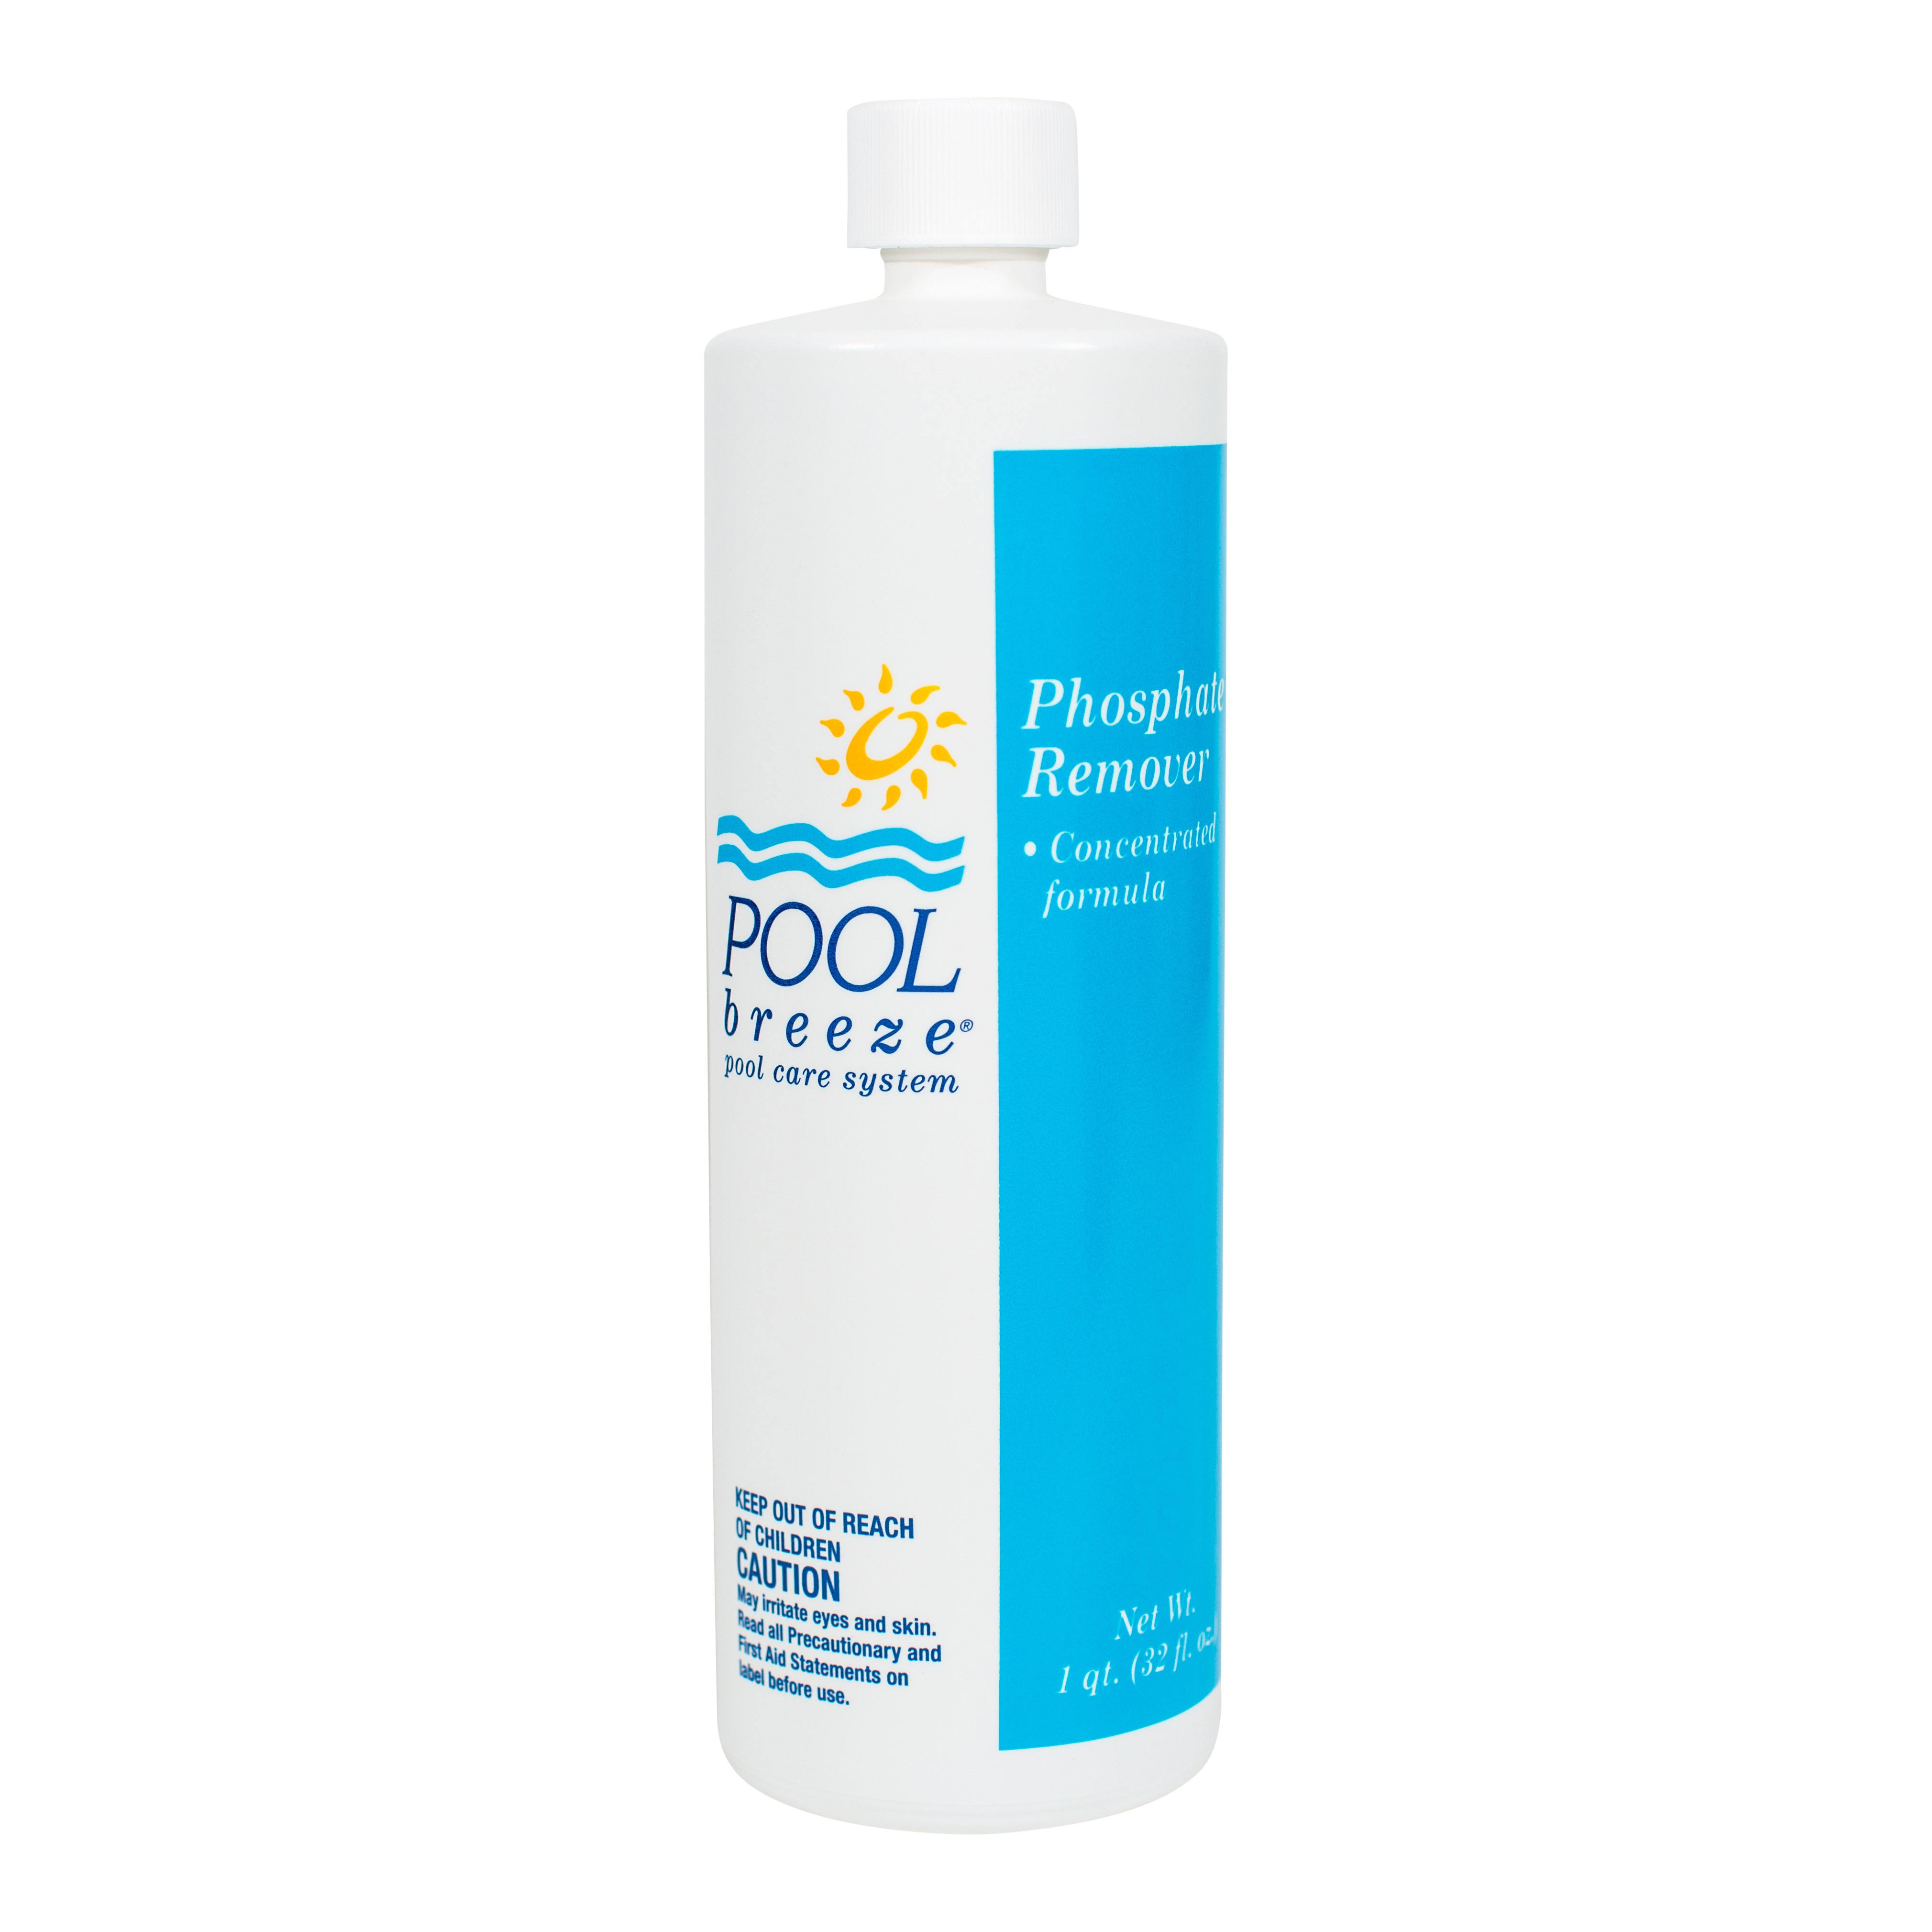 Pool Breeze Phosphate Remover (1 qt)